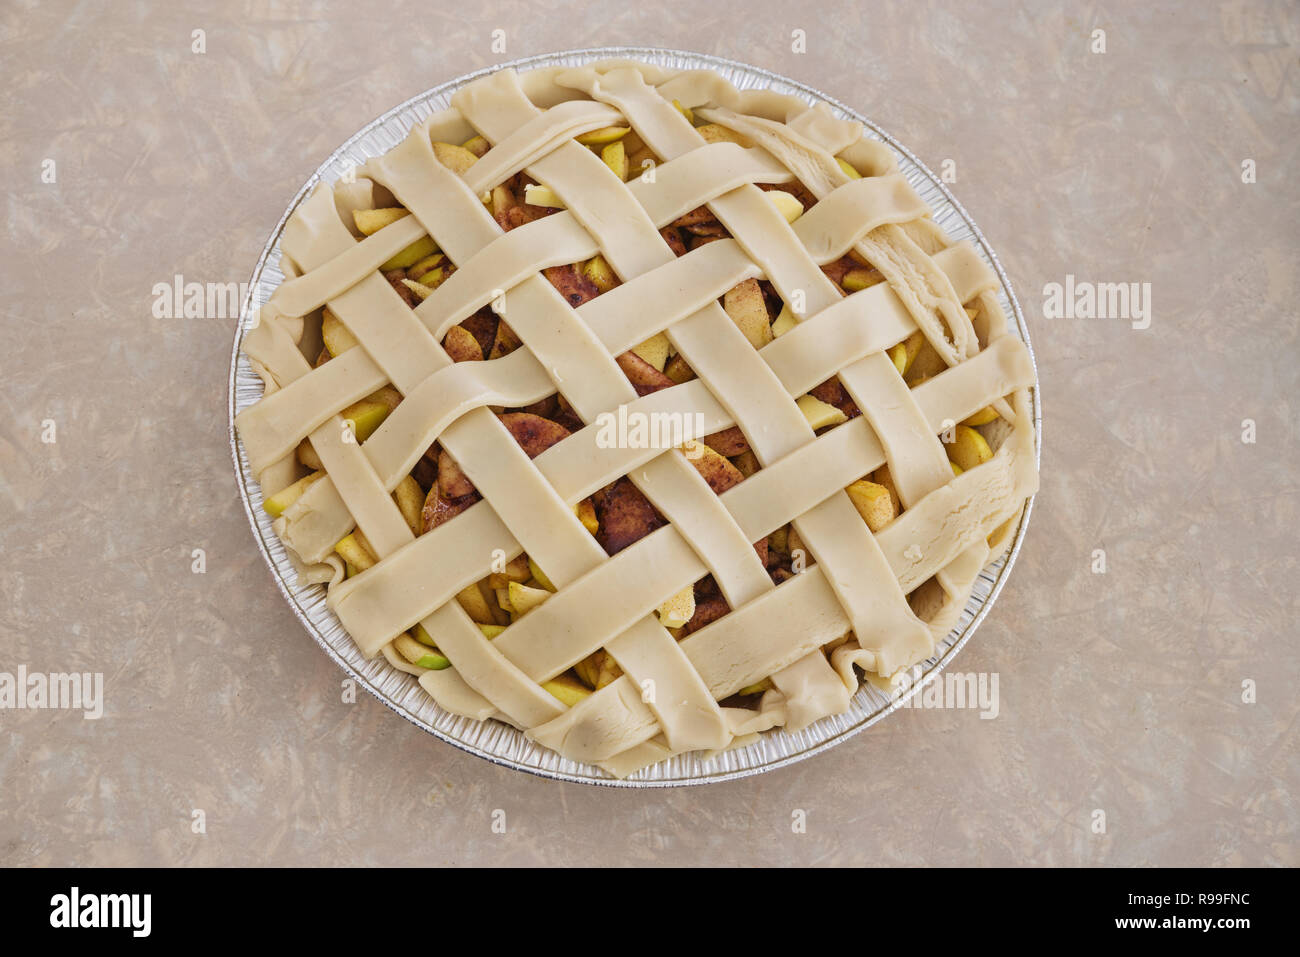 raw homemade apple pie with lattice crust ready to be baked Stock Photo